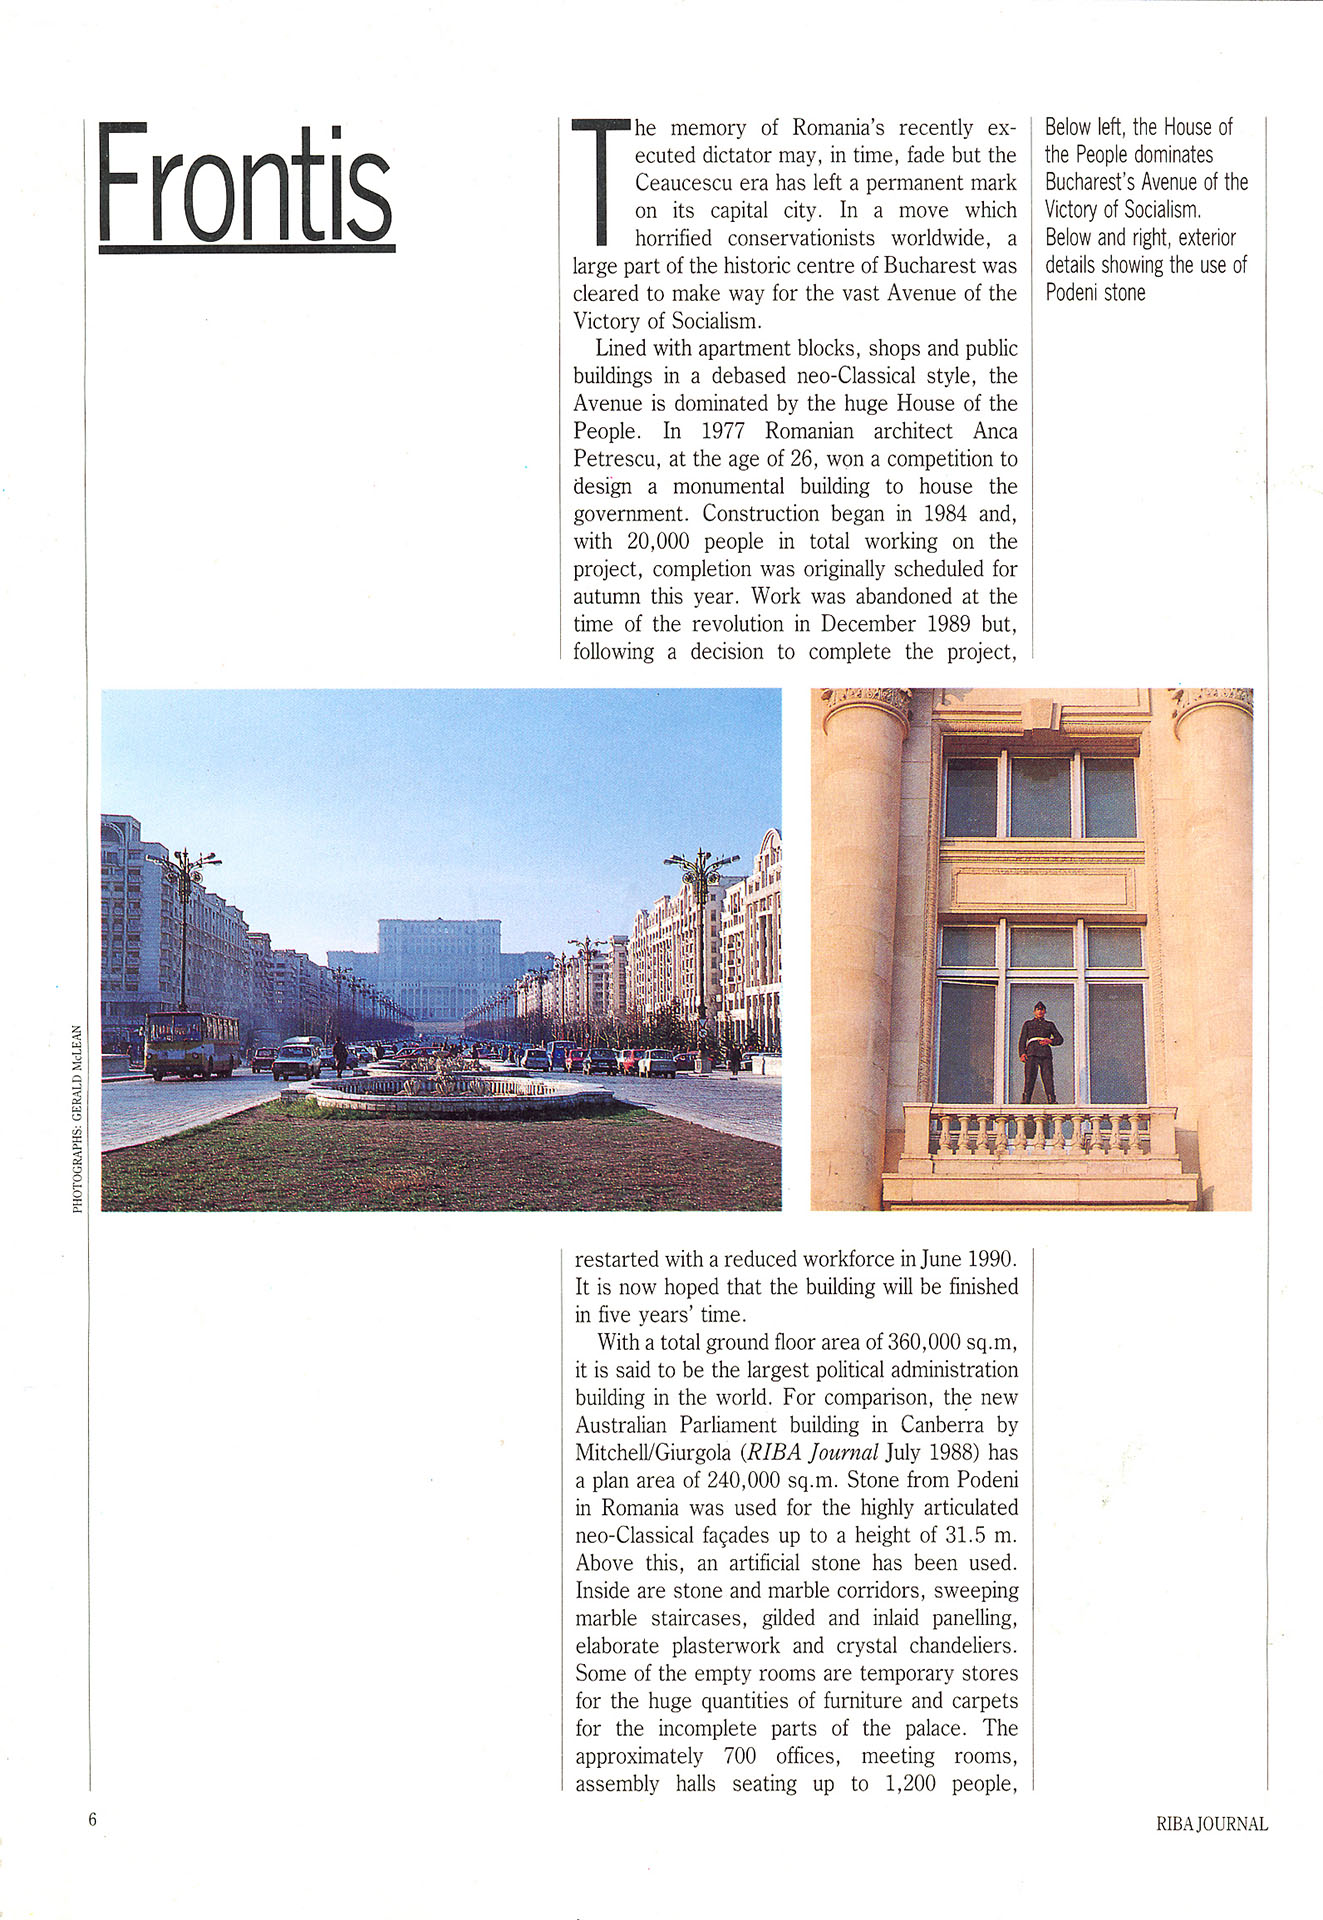 RIBA Journal cover story on The House of the People Romania